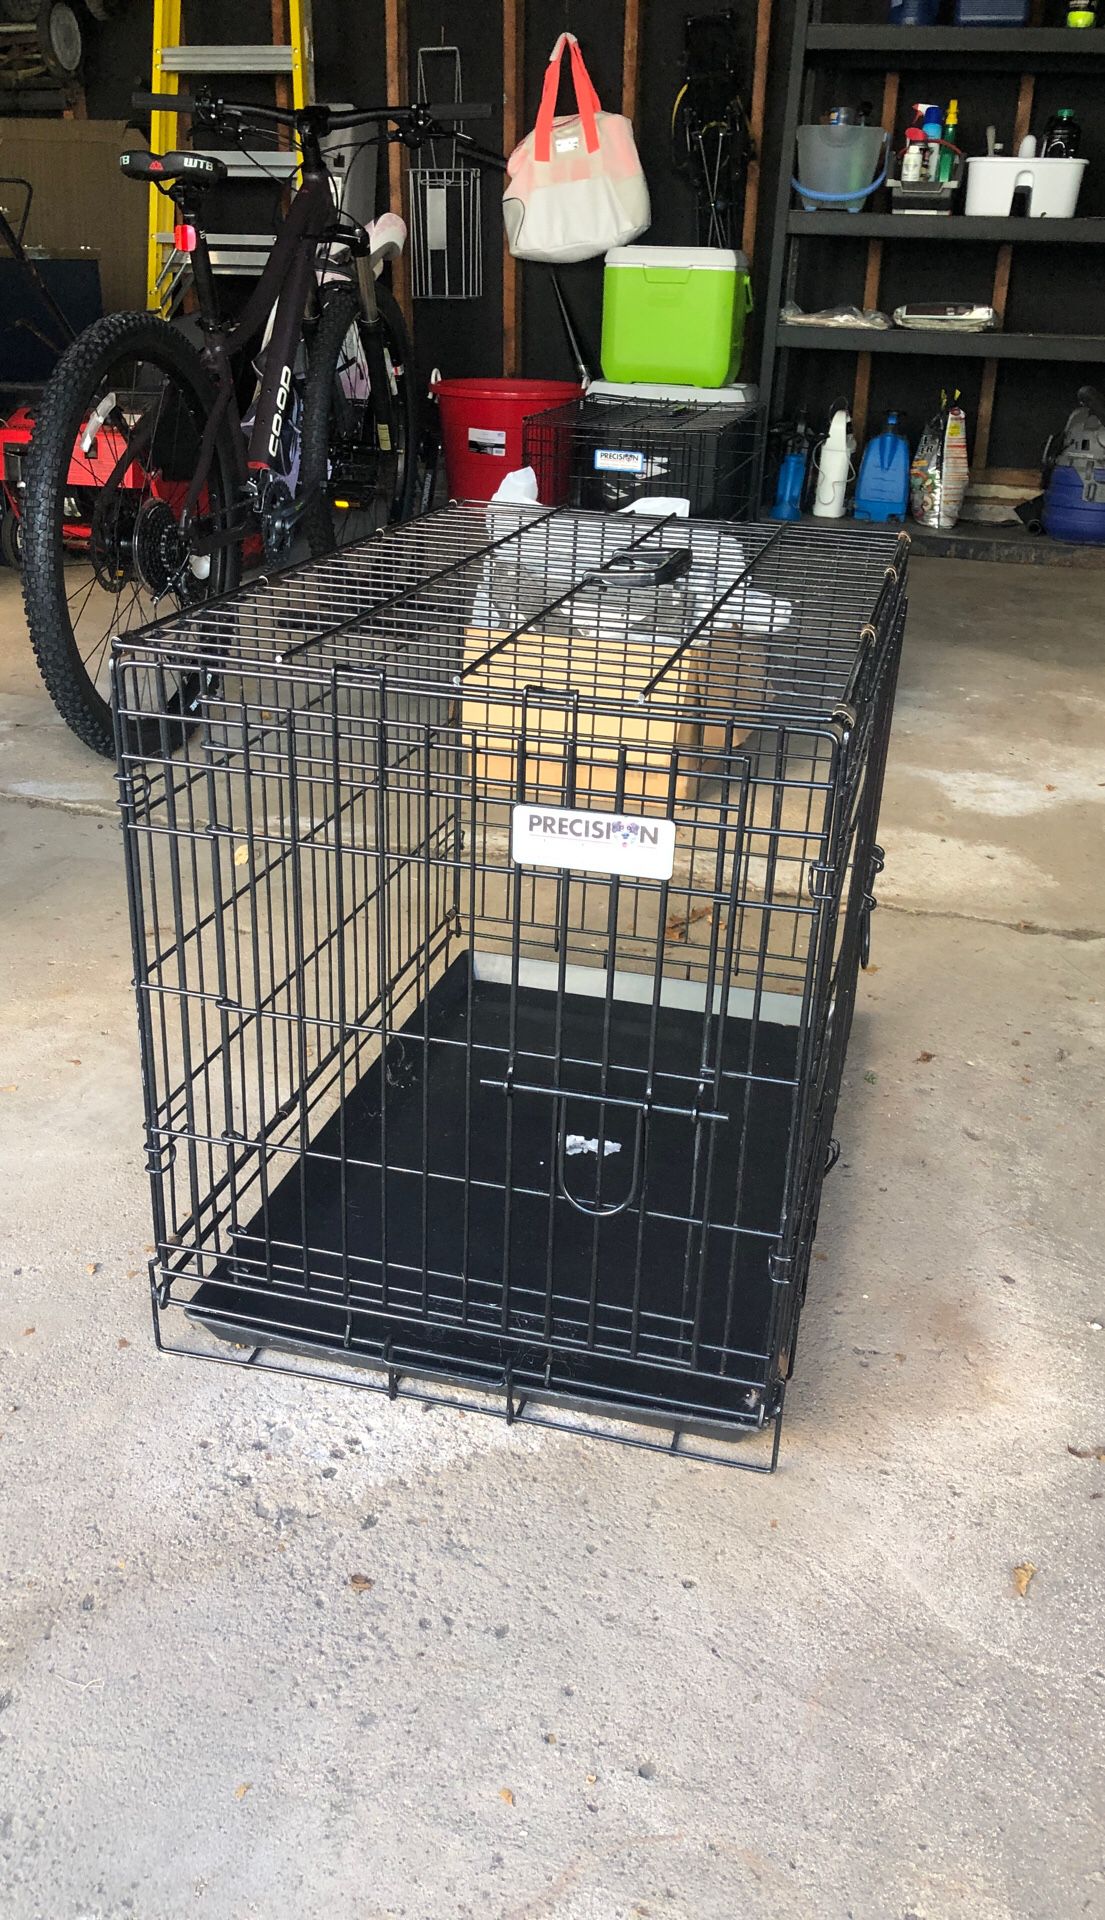 Precision Dog Crate - Like New